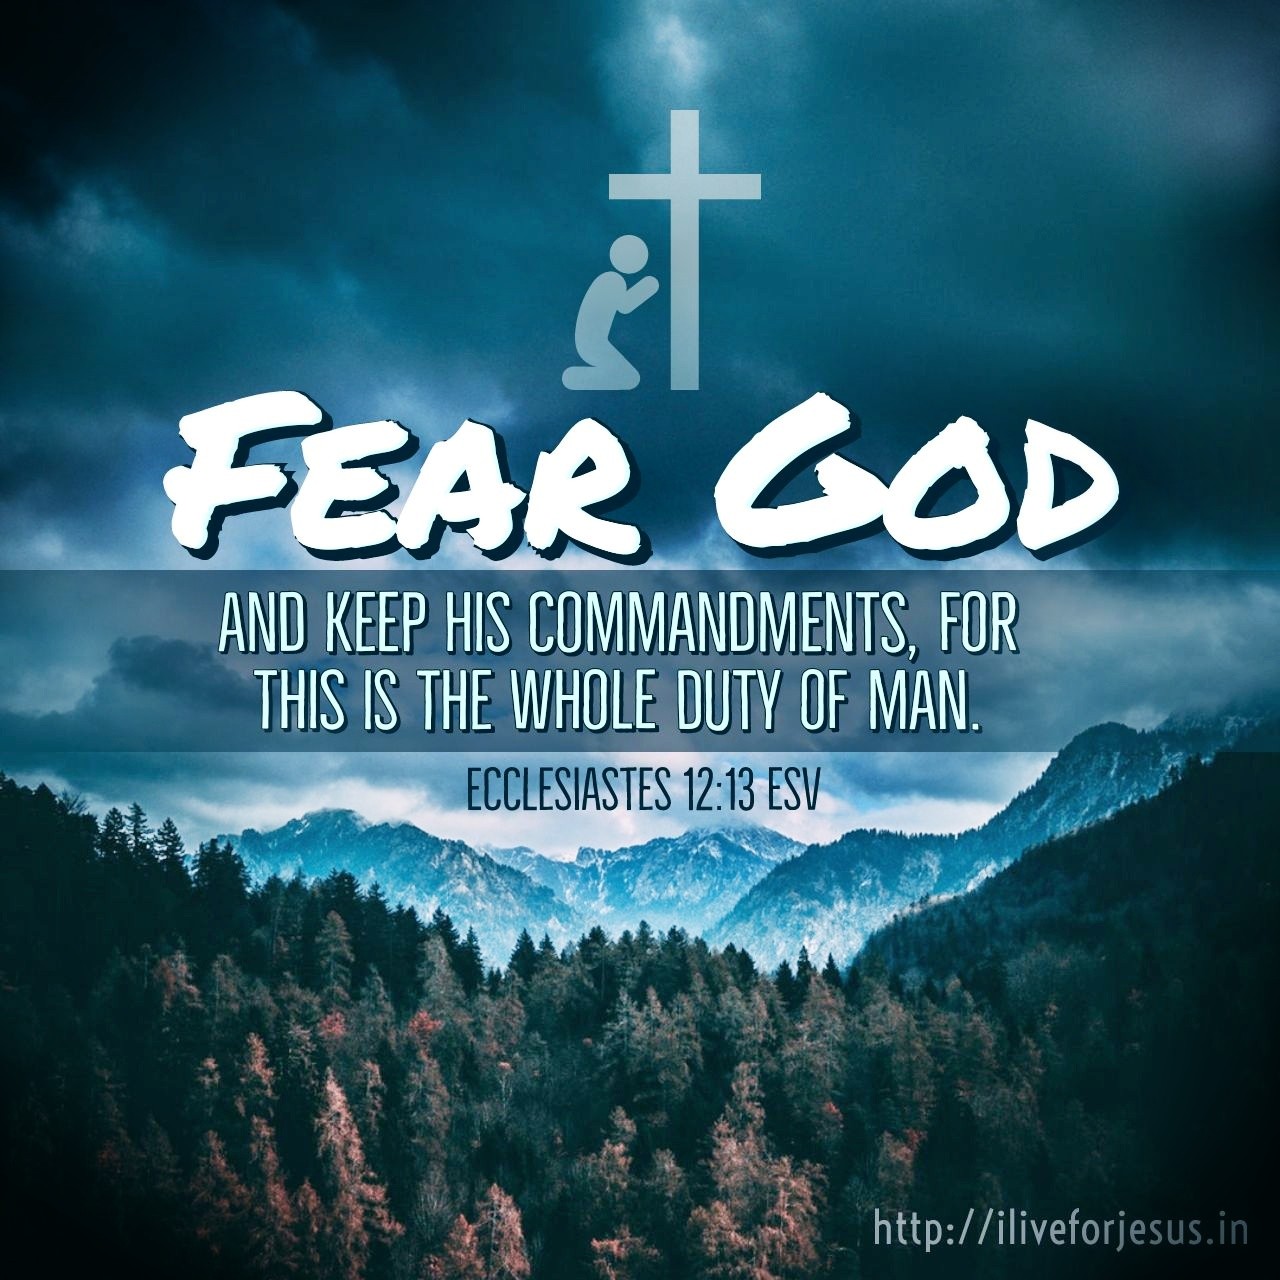 Fear God and keep his commandments, for this is the whole duty of man. Ecclesiastes 12:13 ESV